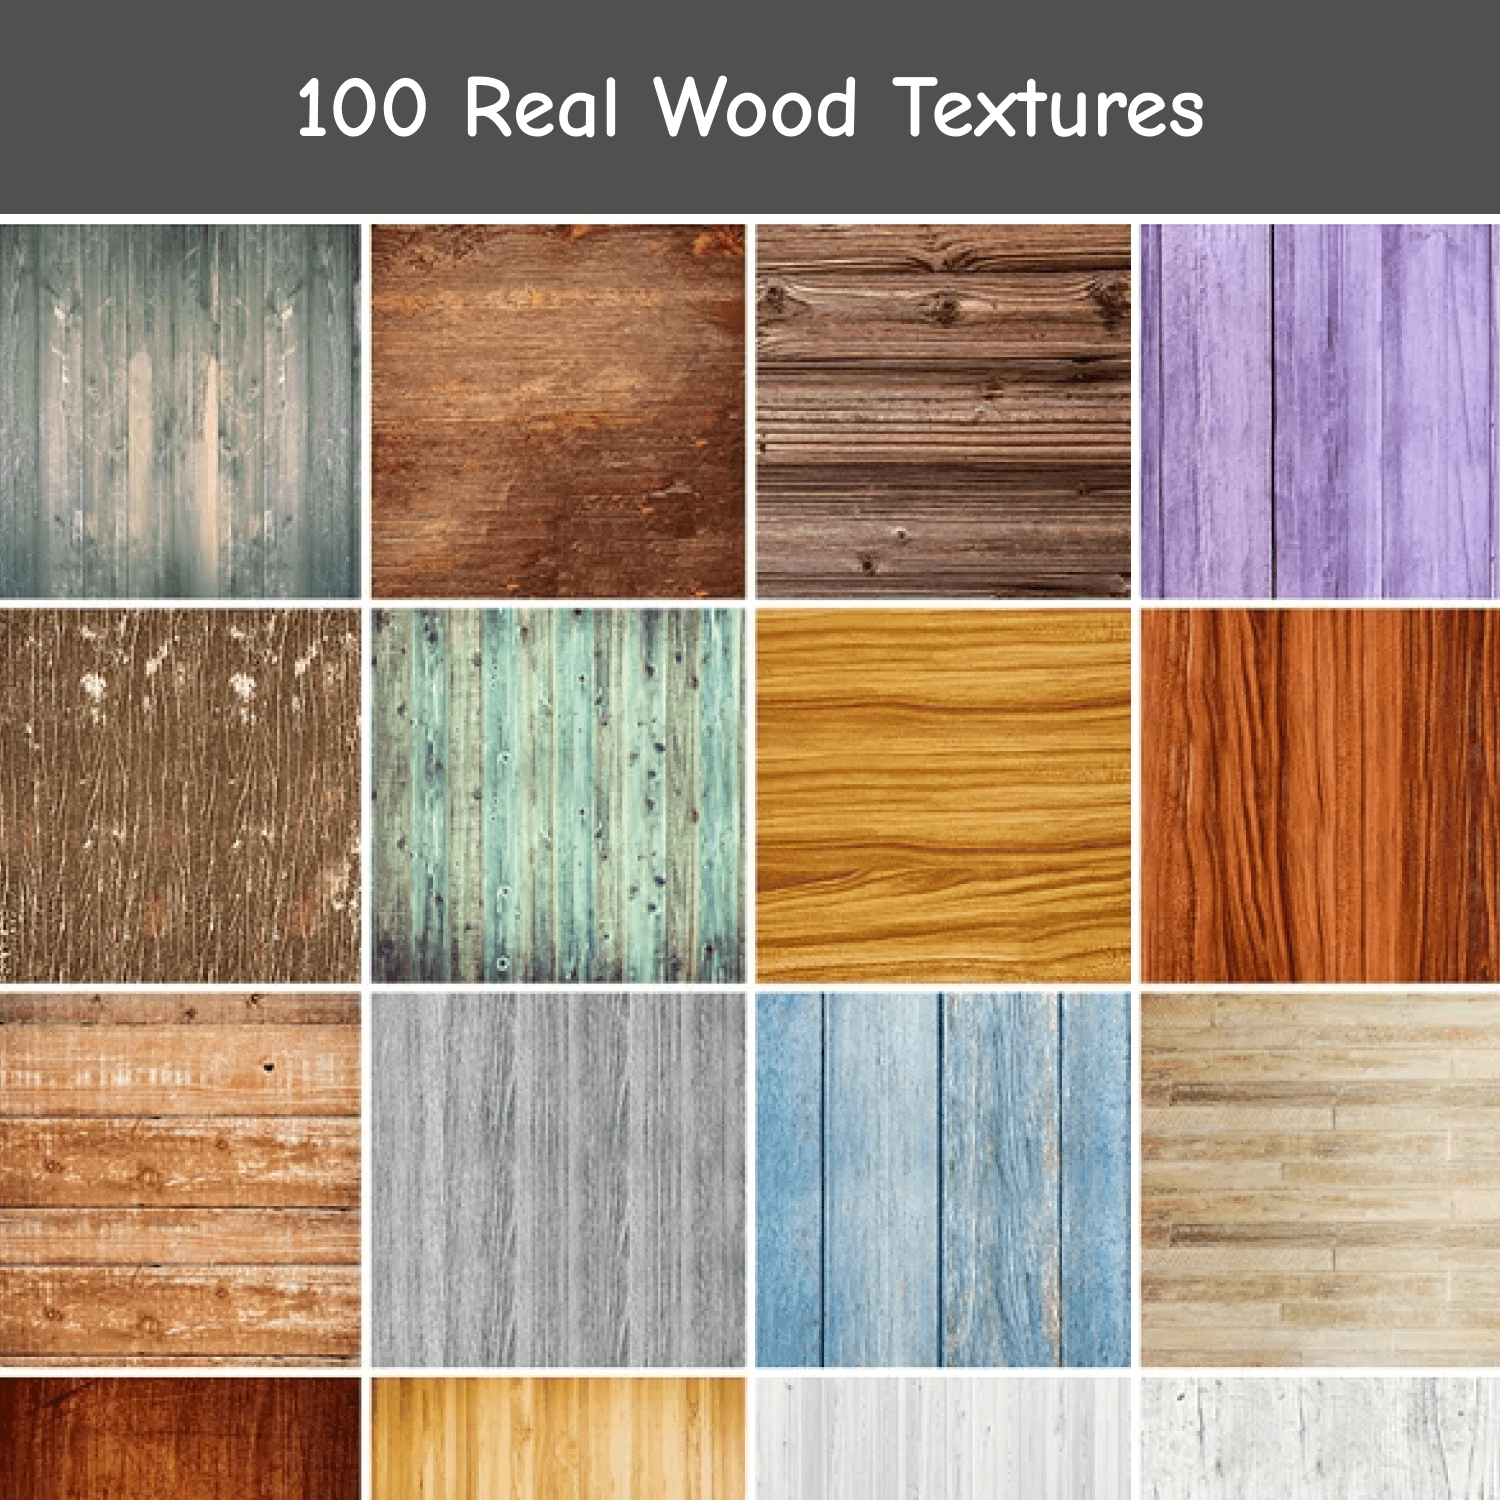 100 Real Wood Textures cover.